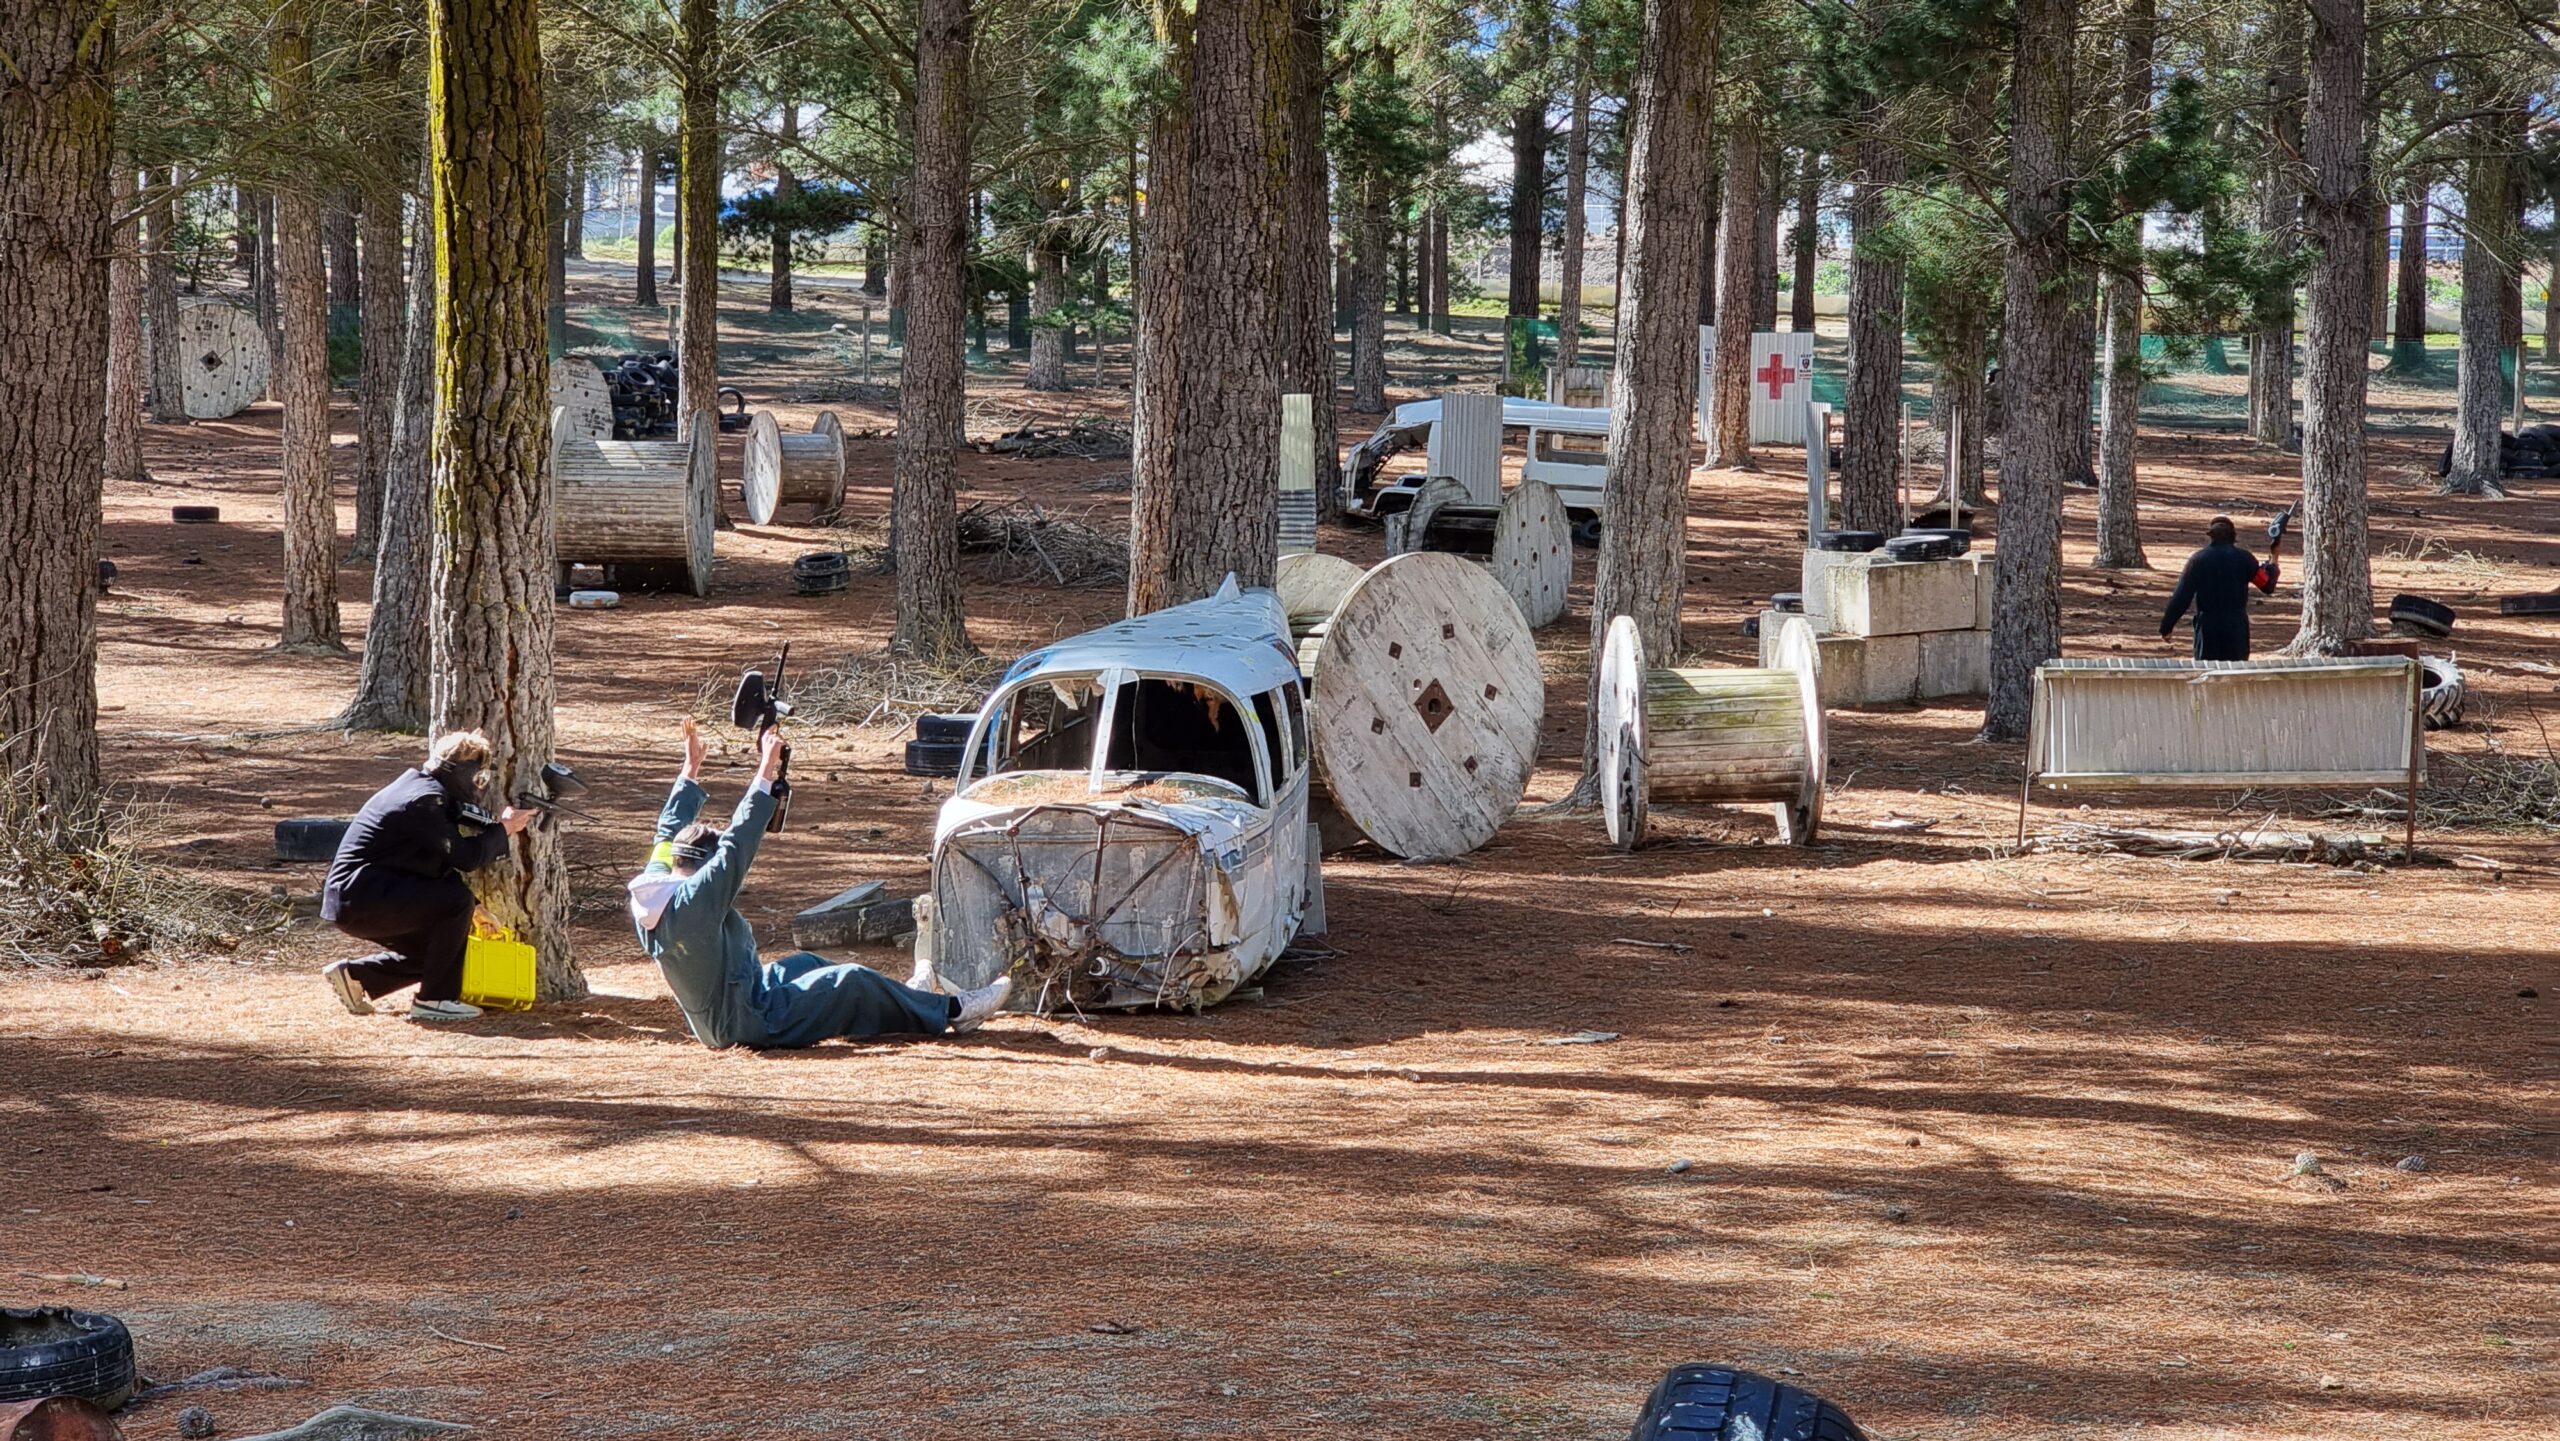 Paintball player surrendering next to crashed aircraft